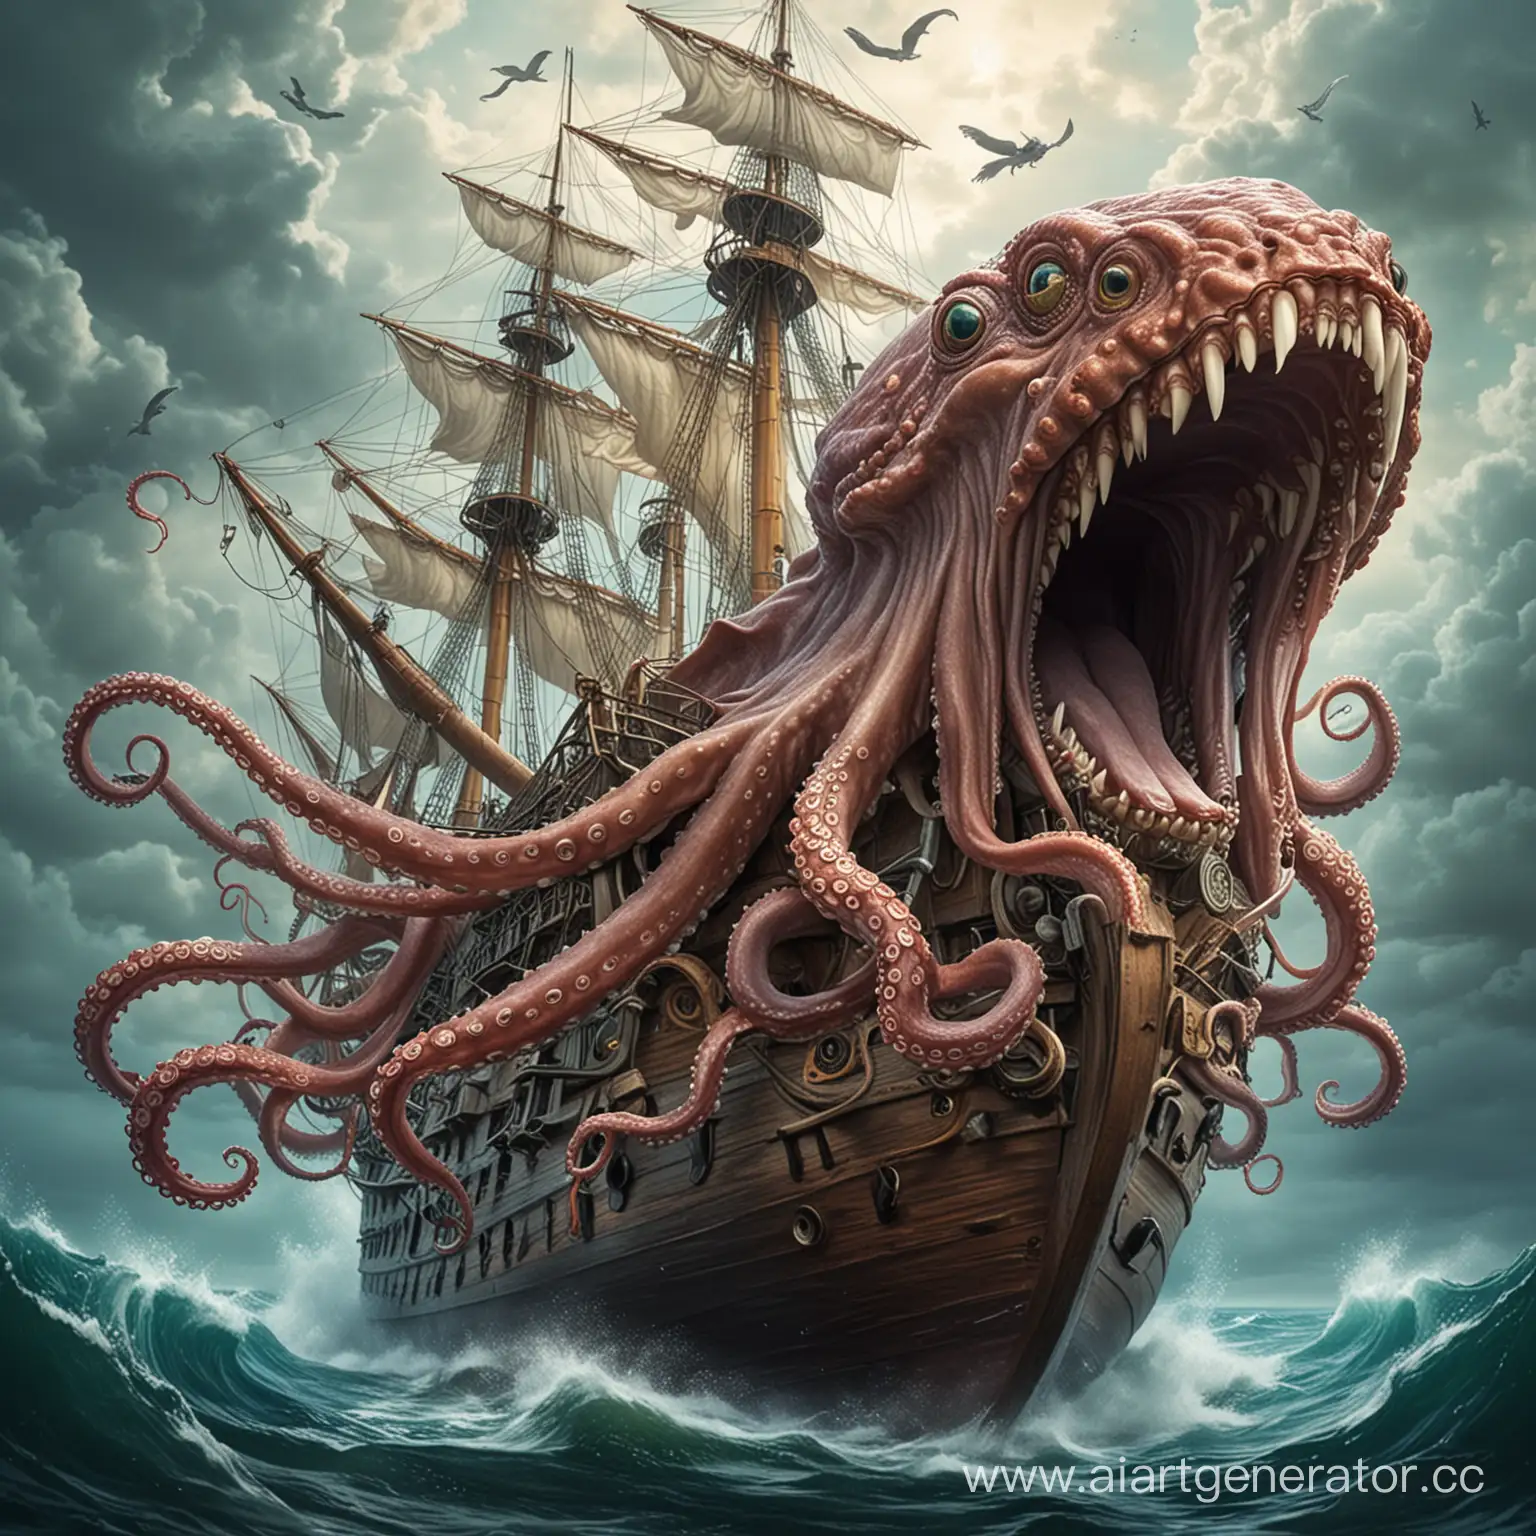 the ship in the octopus's mouth